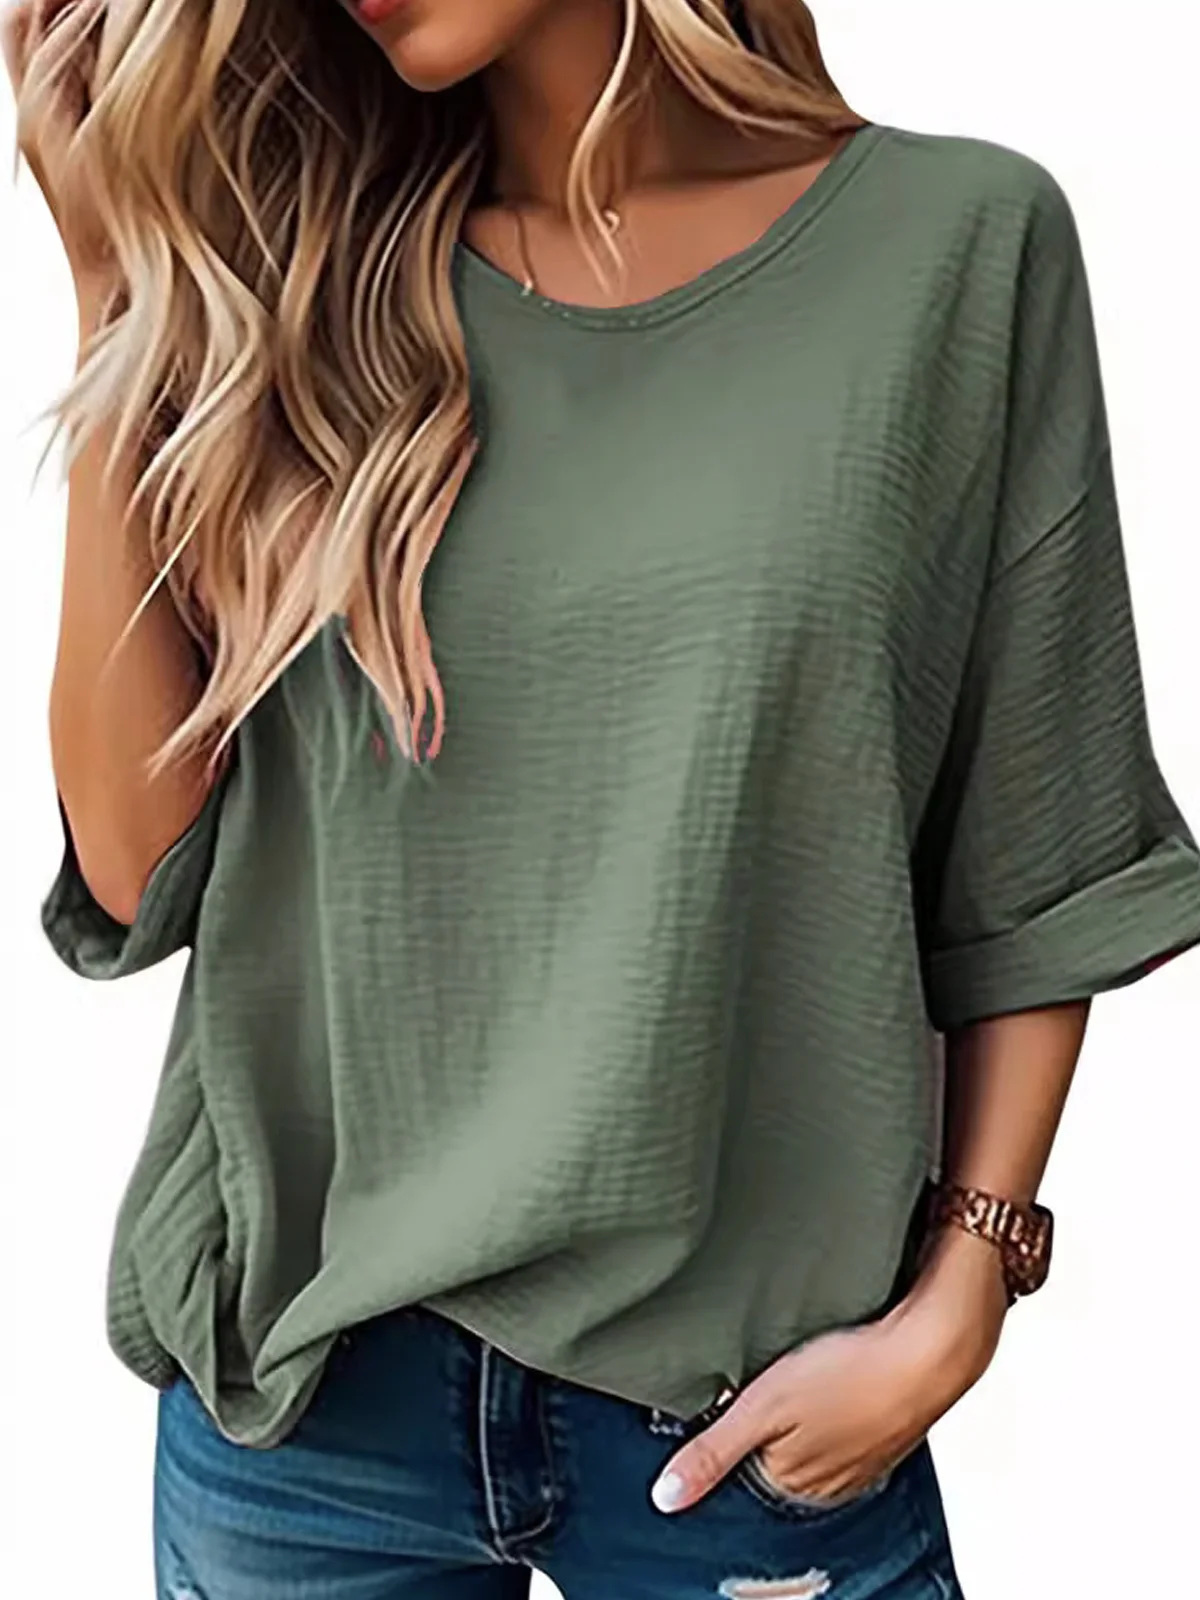 Women's 3/4 Sleeve Blouse Summer Plain Crew Neck Daily Going Out Casual Top Blue